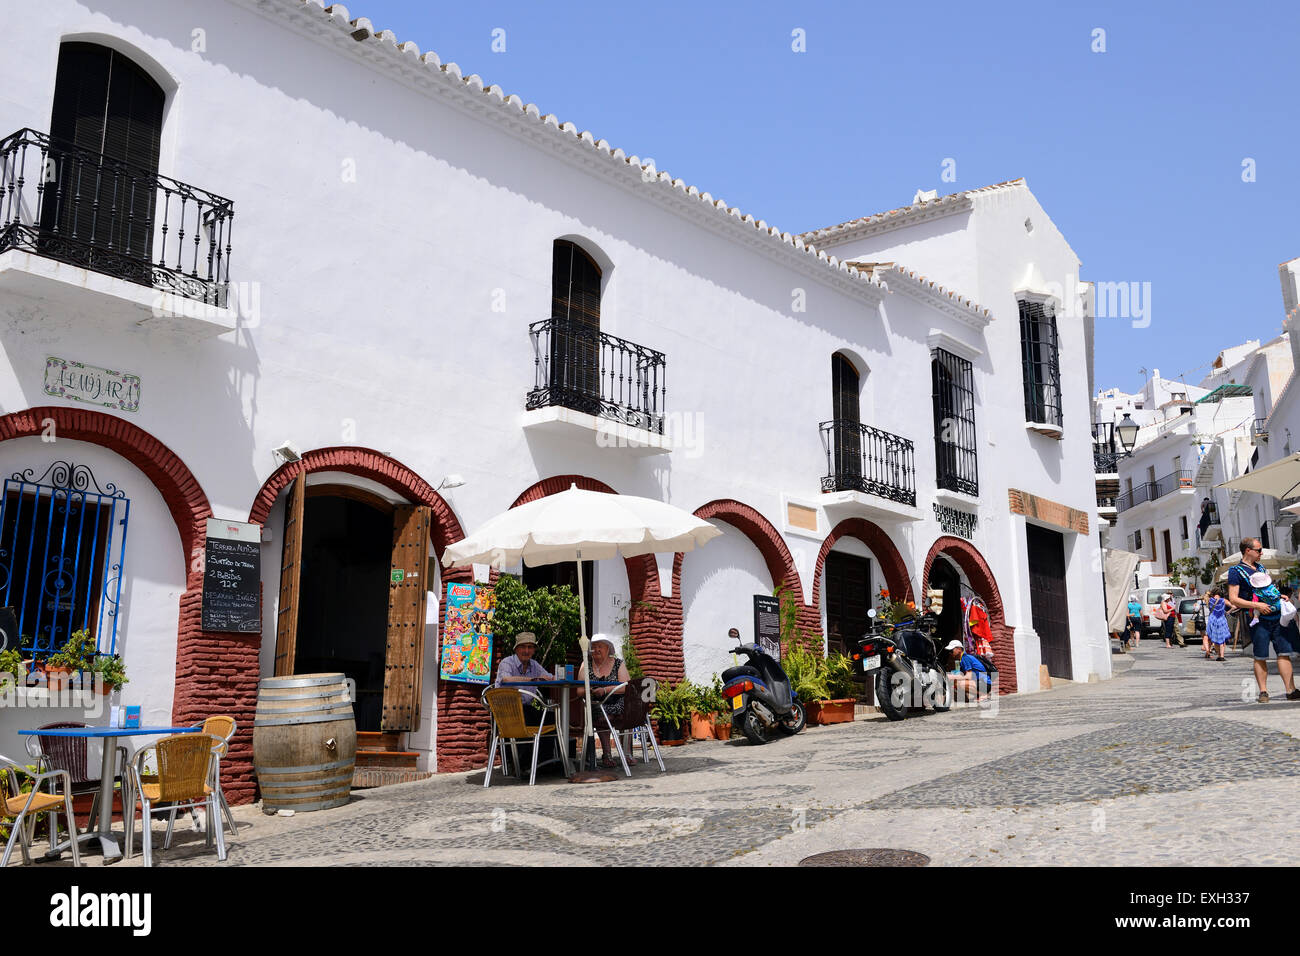 Historic old town of Frigiliana, near Nerja, Costa del Sol, Andalusia, Southern Spain Stock Photo